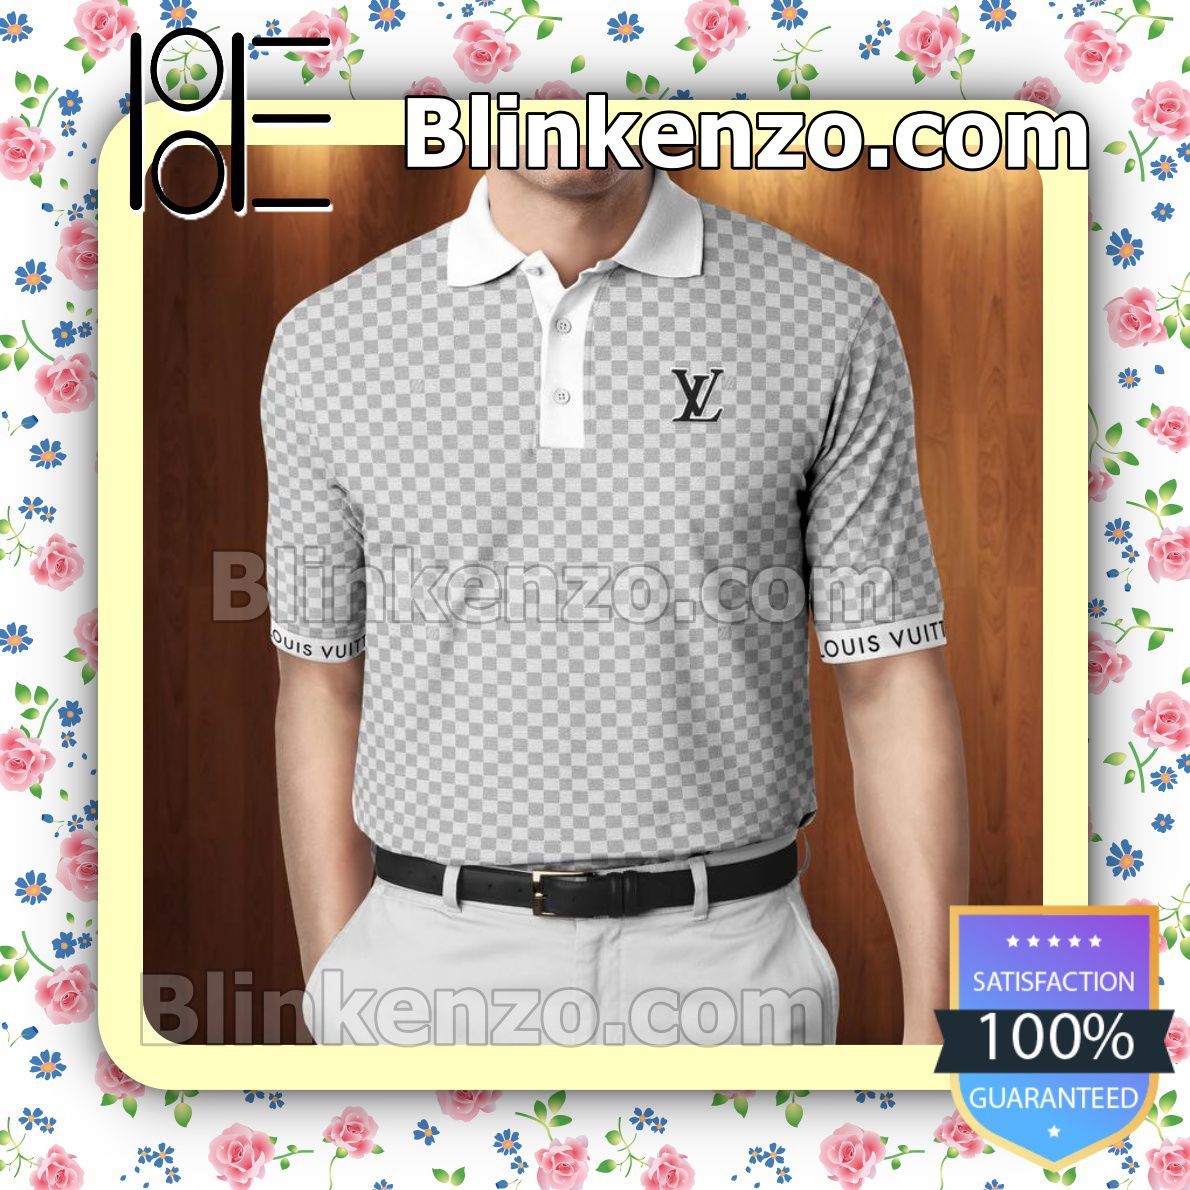 Louis Vuitton White And Grey Checkerboard Full Print Embroidered Polo Shirts